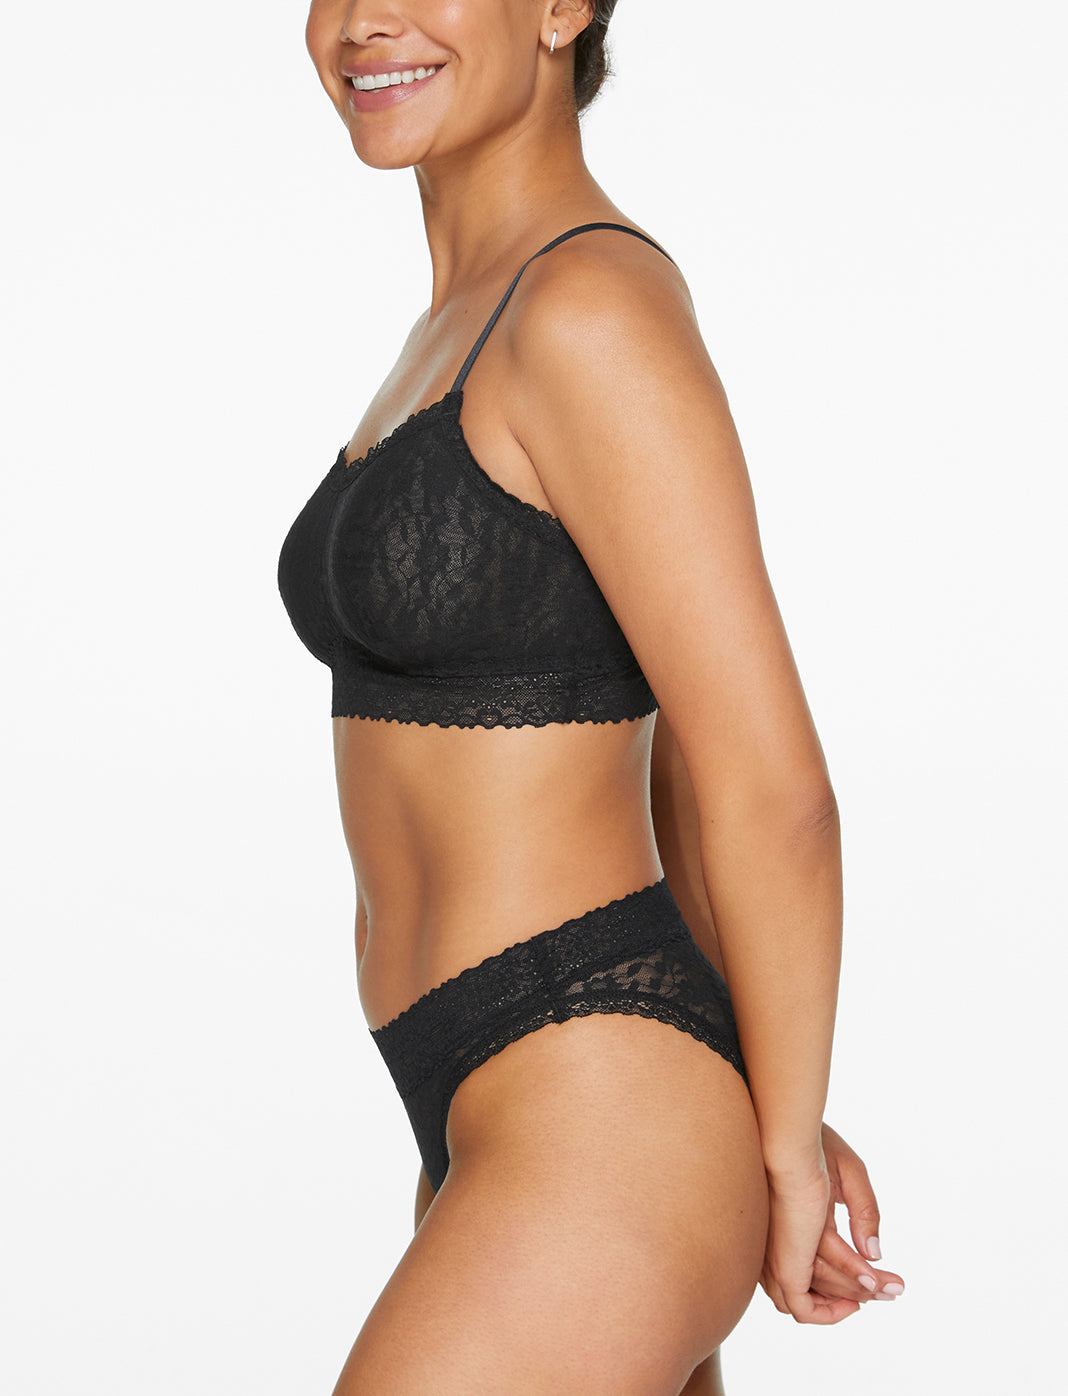 Everyday Lace Full Coverage Bralette Black - Full Coverage Lace Bralette  With Support